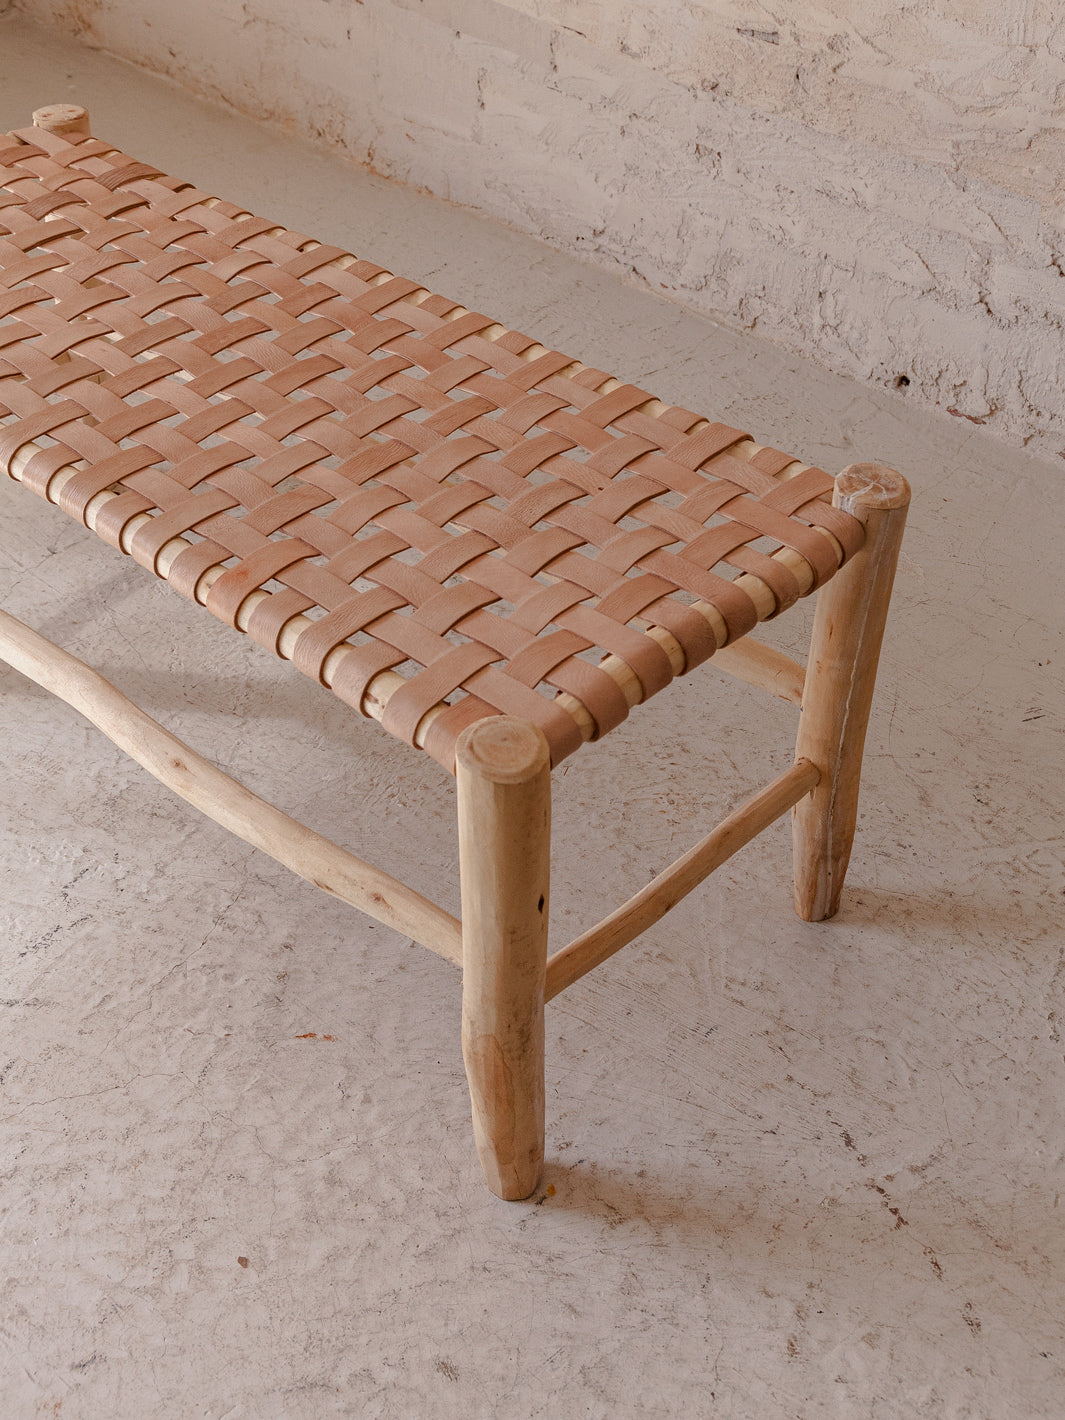 Olive tree artisan leather bench